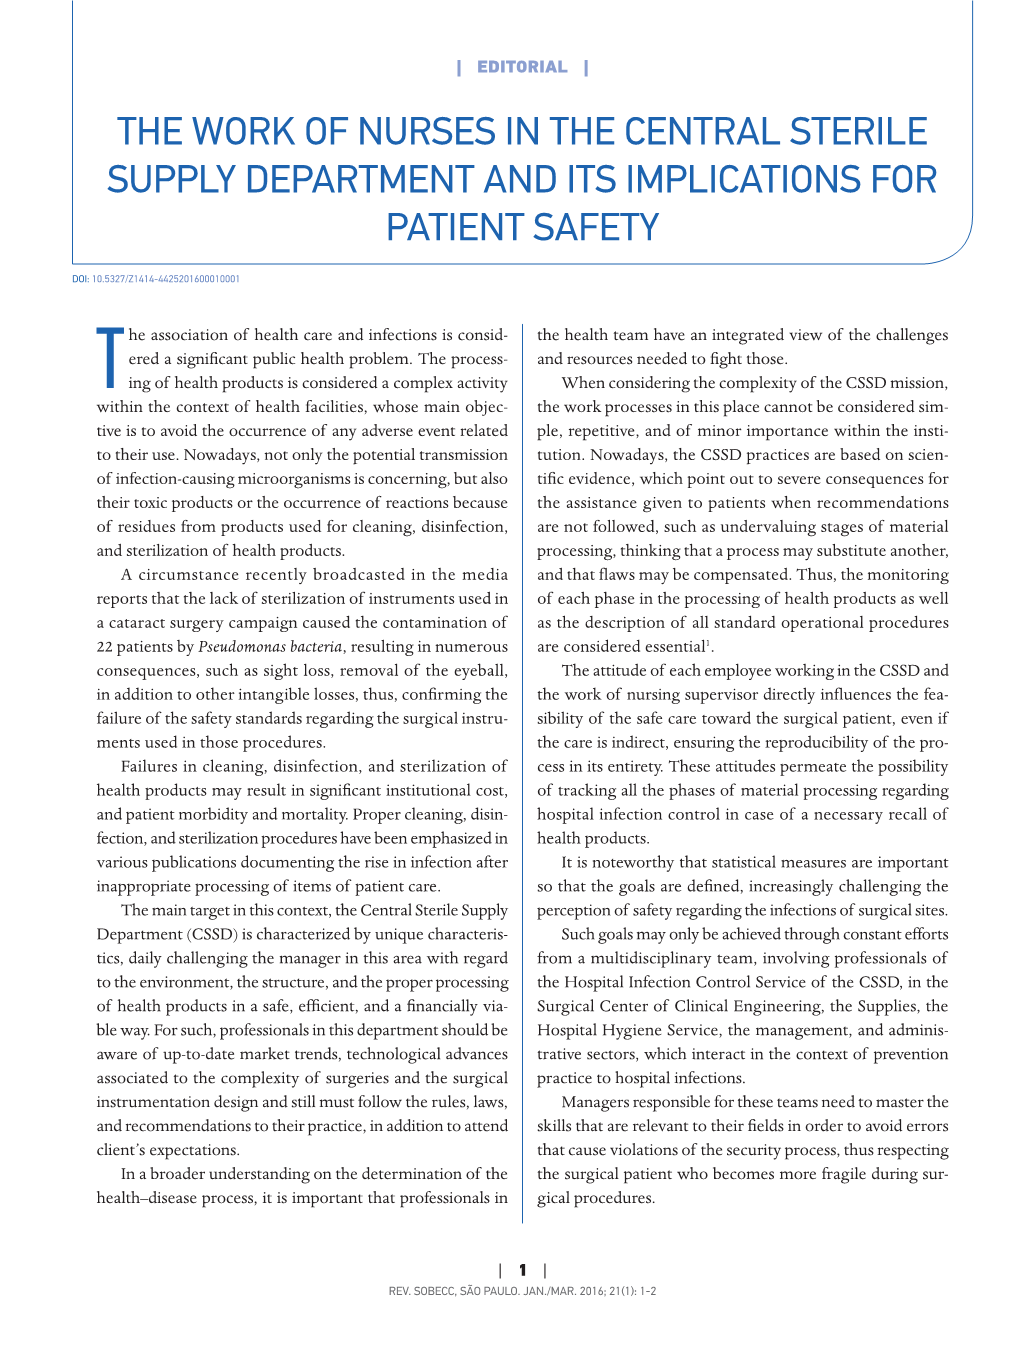 The Work of Nurses in the Central Sterile Supply Department and Its Implications for Patient Safety